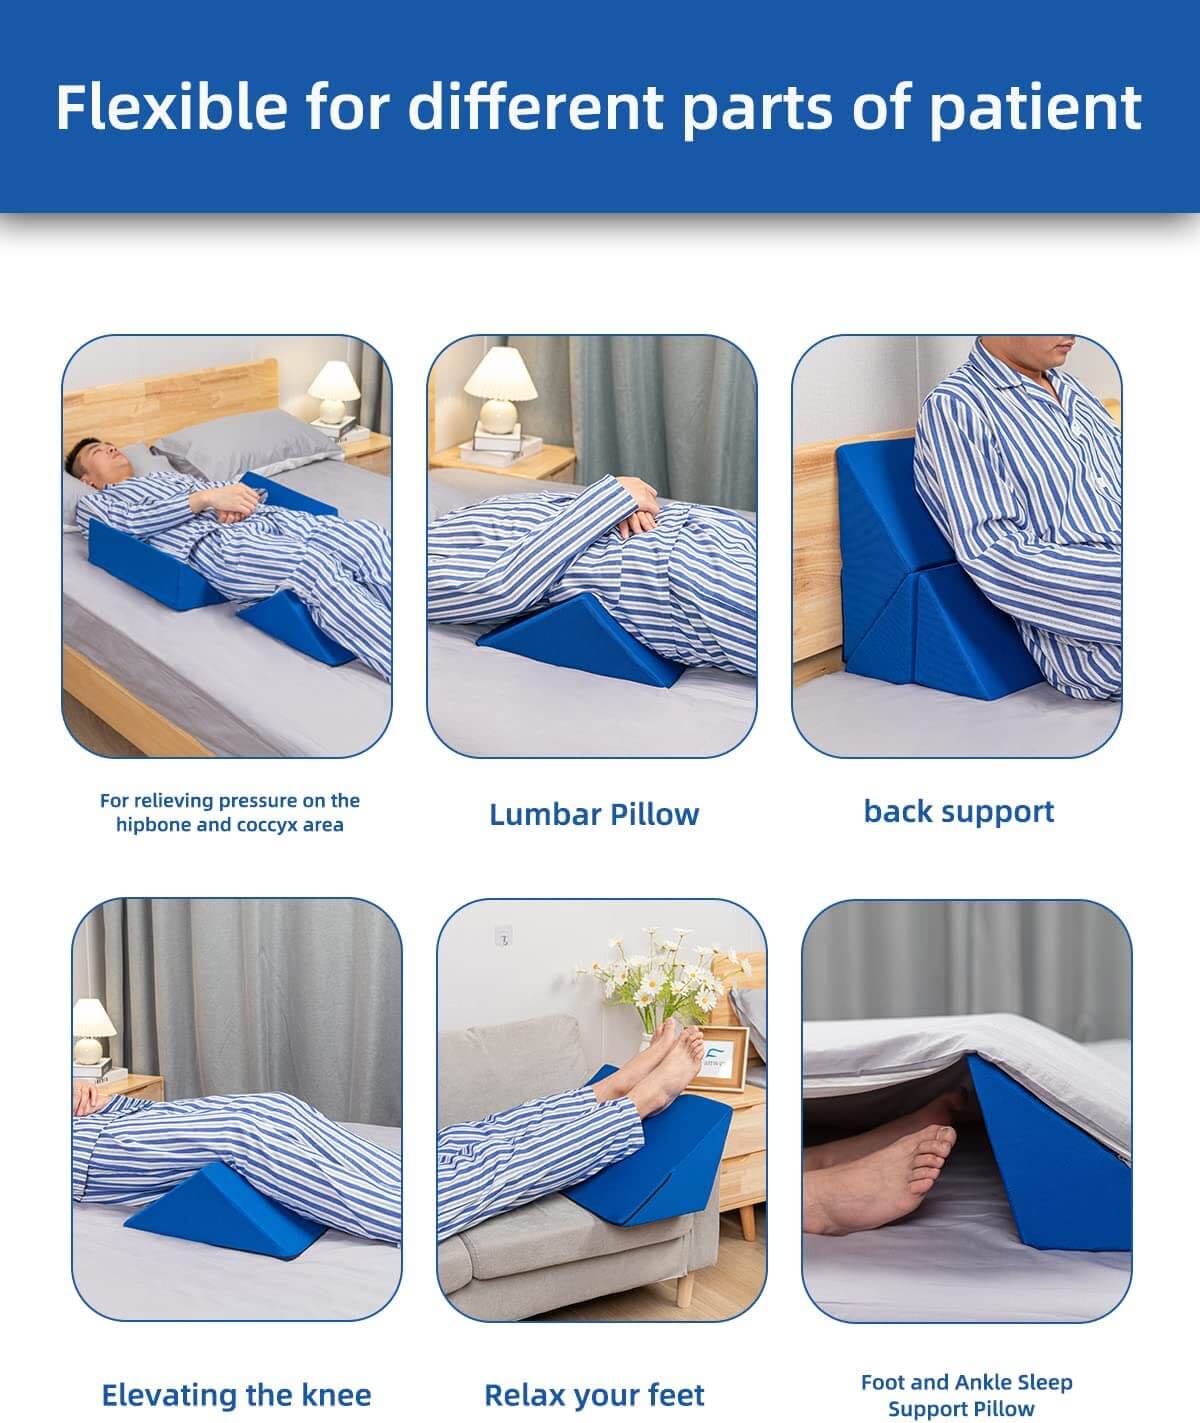 foam wedge pillow back pain, different bodies